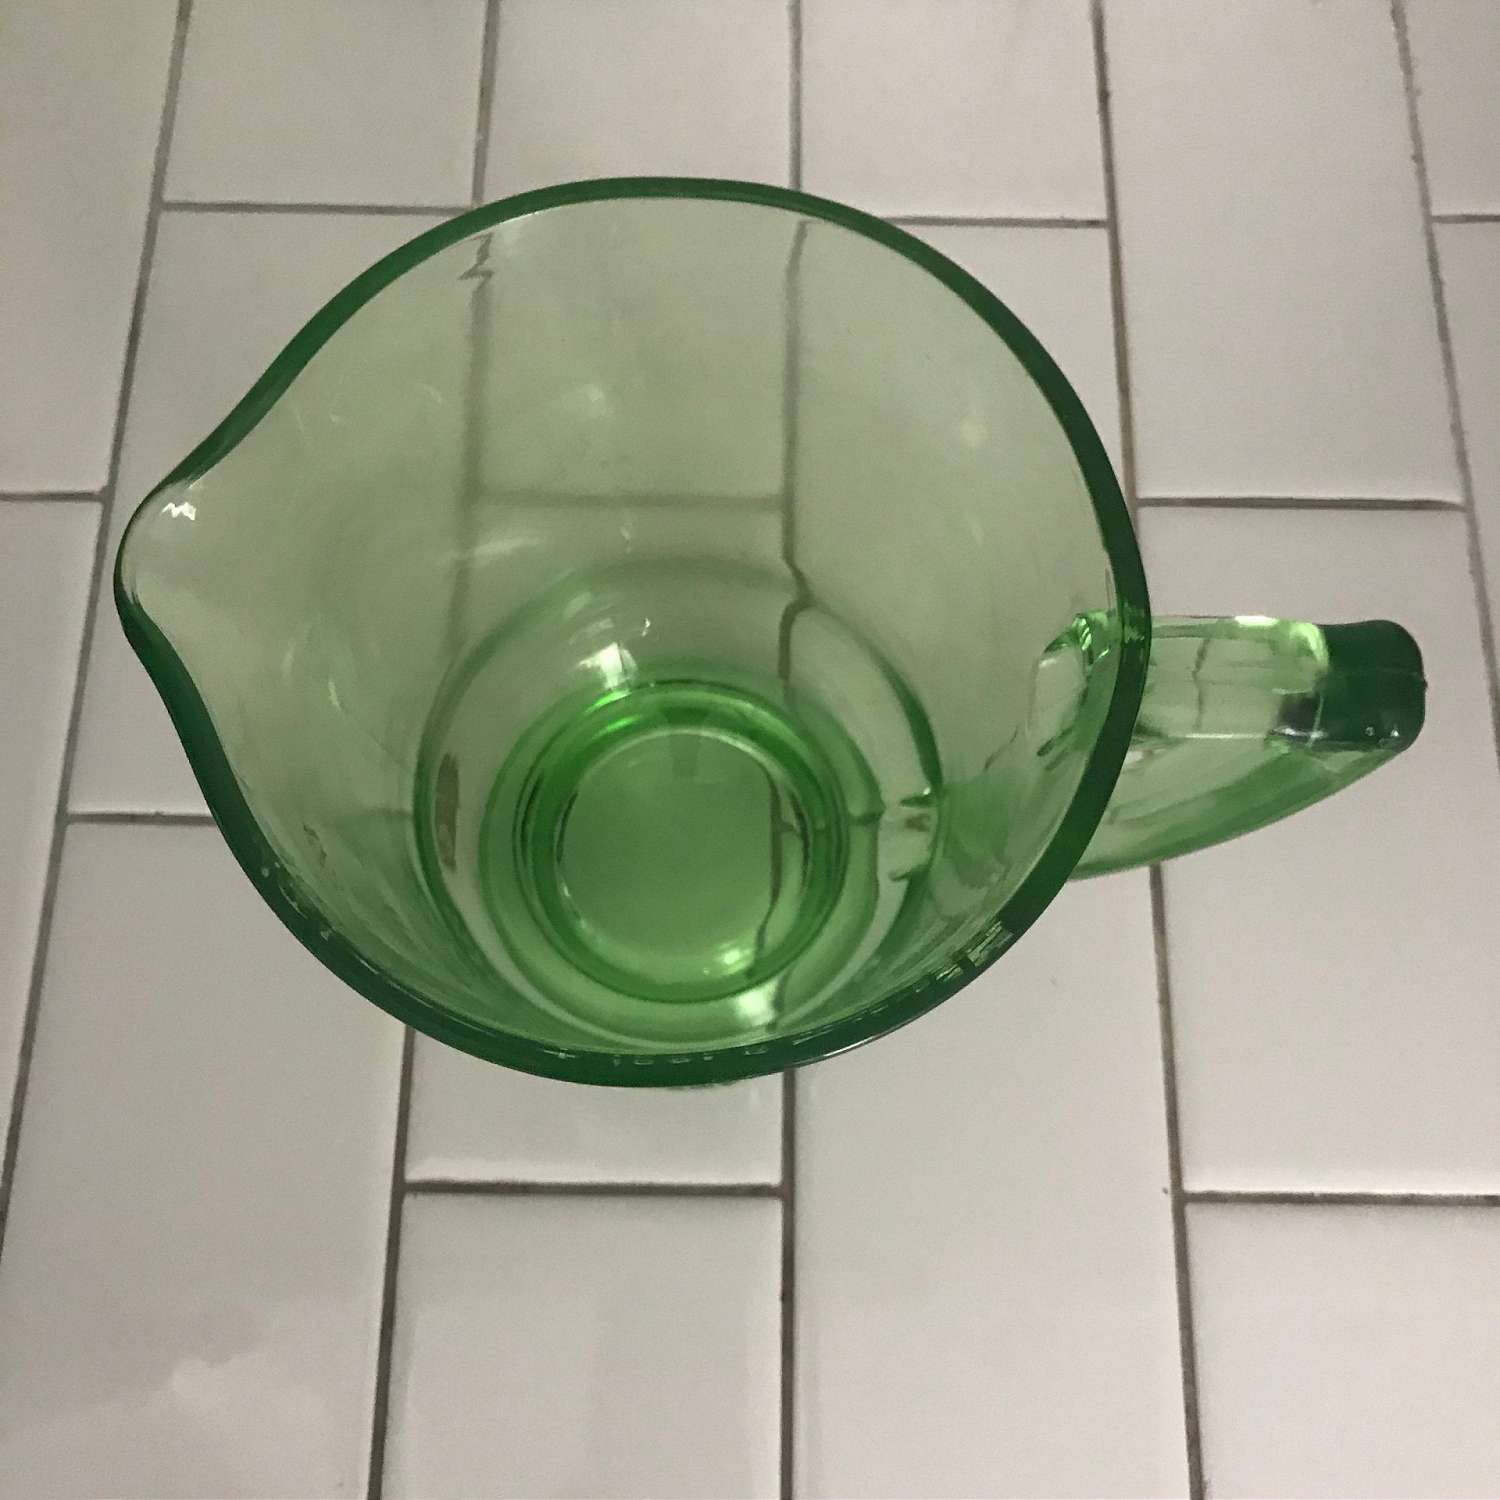 https://www.truevintageantiques.com/wp-content/uploads/2019/12/antique-uranium-glass-measuring-cup-4-cups-green-kitchen-collectible-display-farmhouse-glows-green-5df179508-scaled.jpg